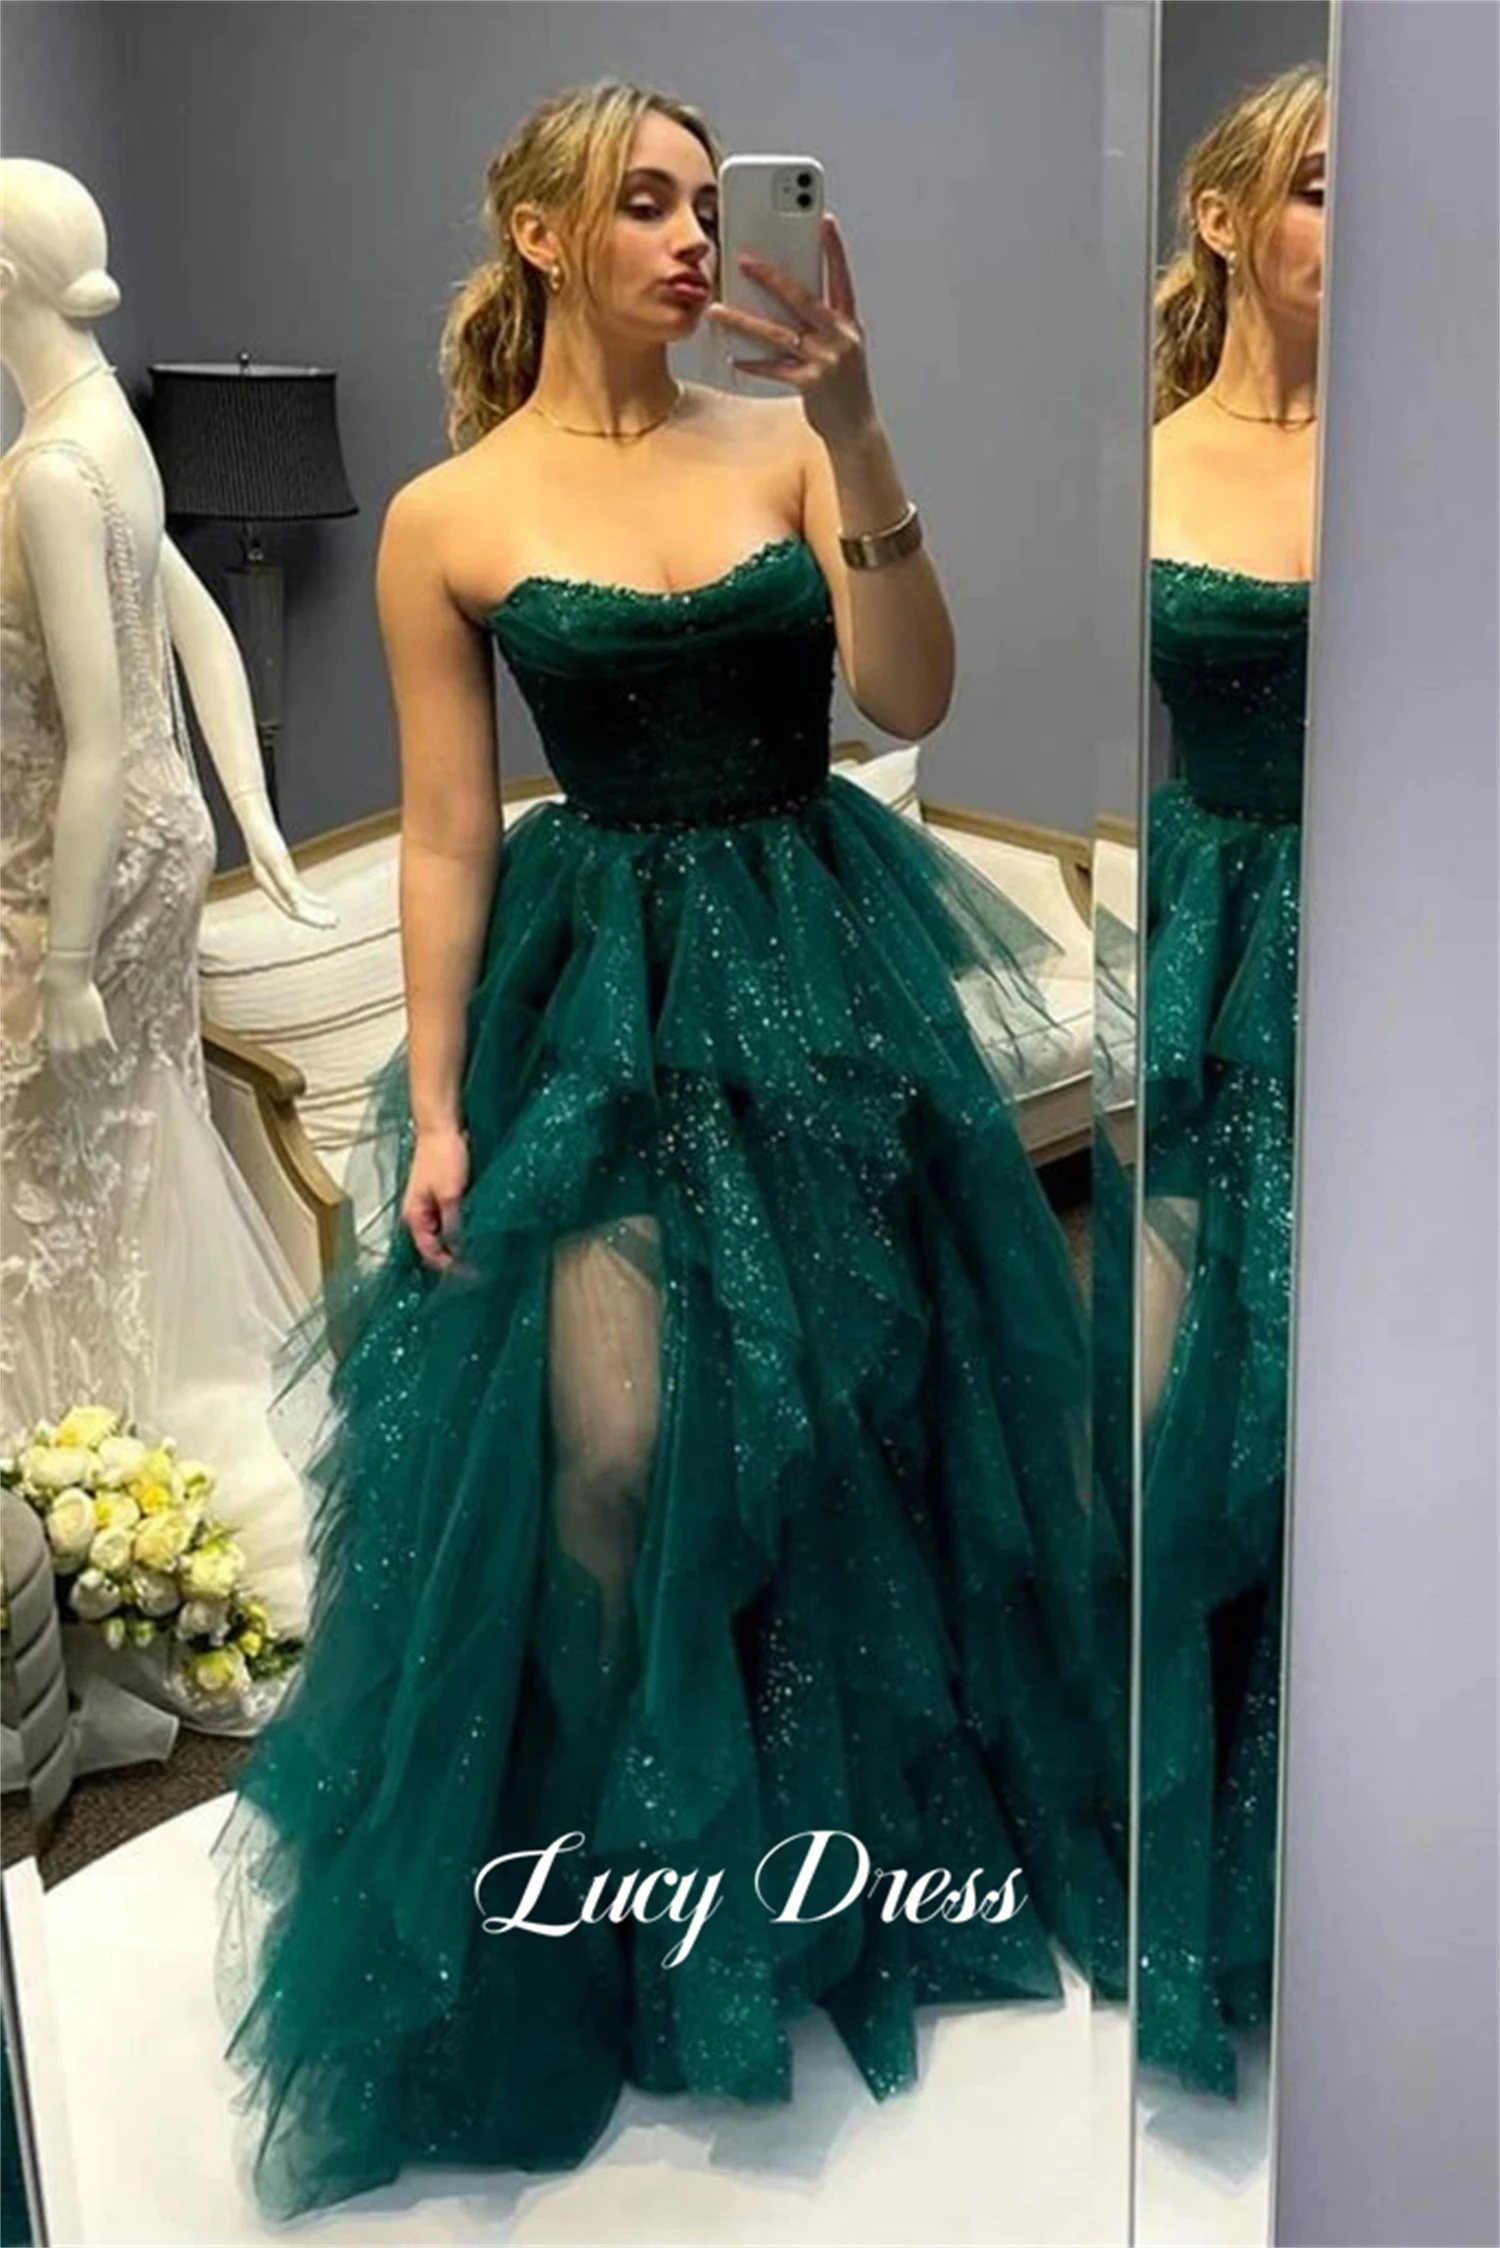 

Lucy Graduation Gown Green Ball Shiny Mesh Layered Slit Luxurious Turkish Evening Gowns Gala Dress Women Elegant Party Prom